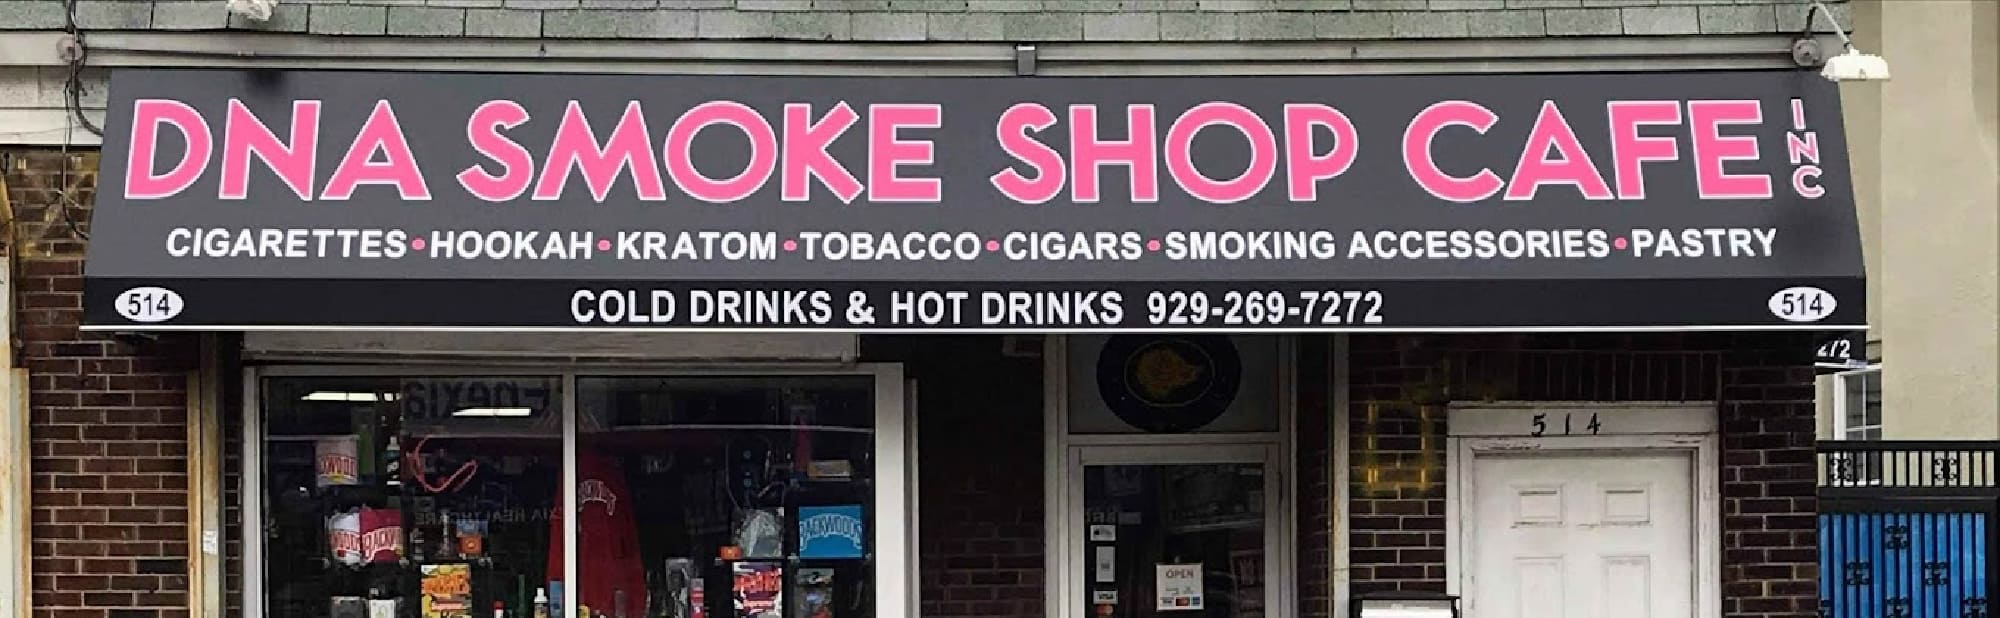 image of dna smoke shop cafe inc in staten island ny